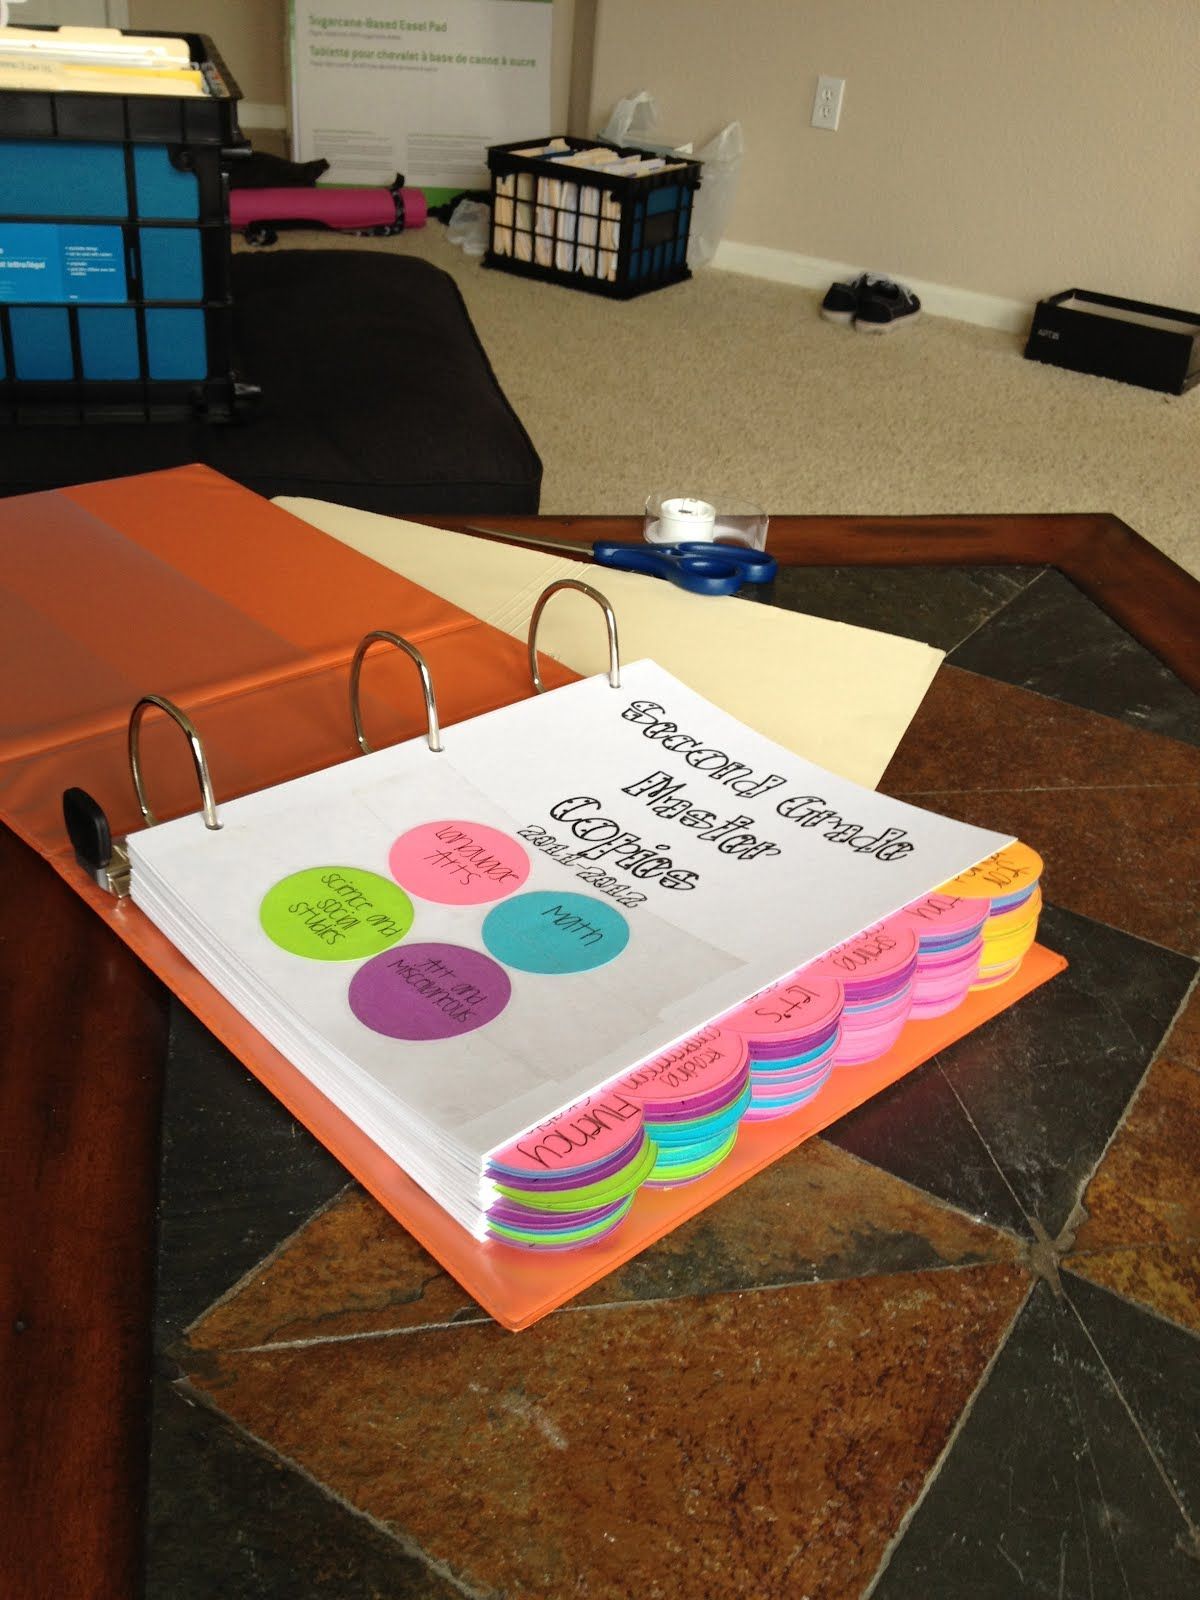 Master Copies Binder: So much easier than shoving everything in a filing cabinet